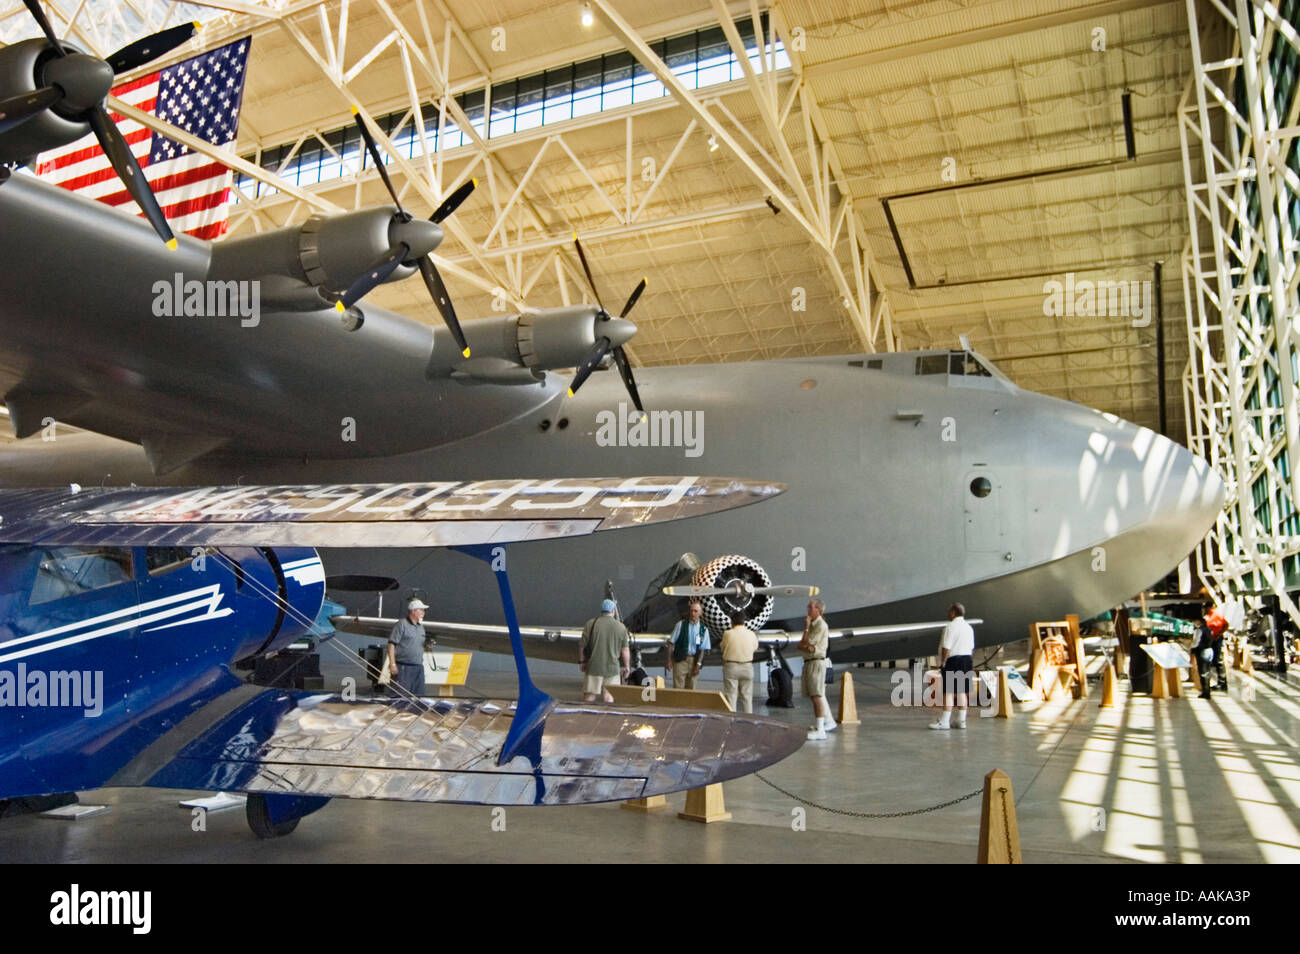 Howard Hughs Spruce Goose jumbo airplane at the Evergreen Aviation Museum in McMinnville Oregon Stock Photo